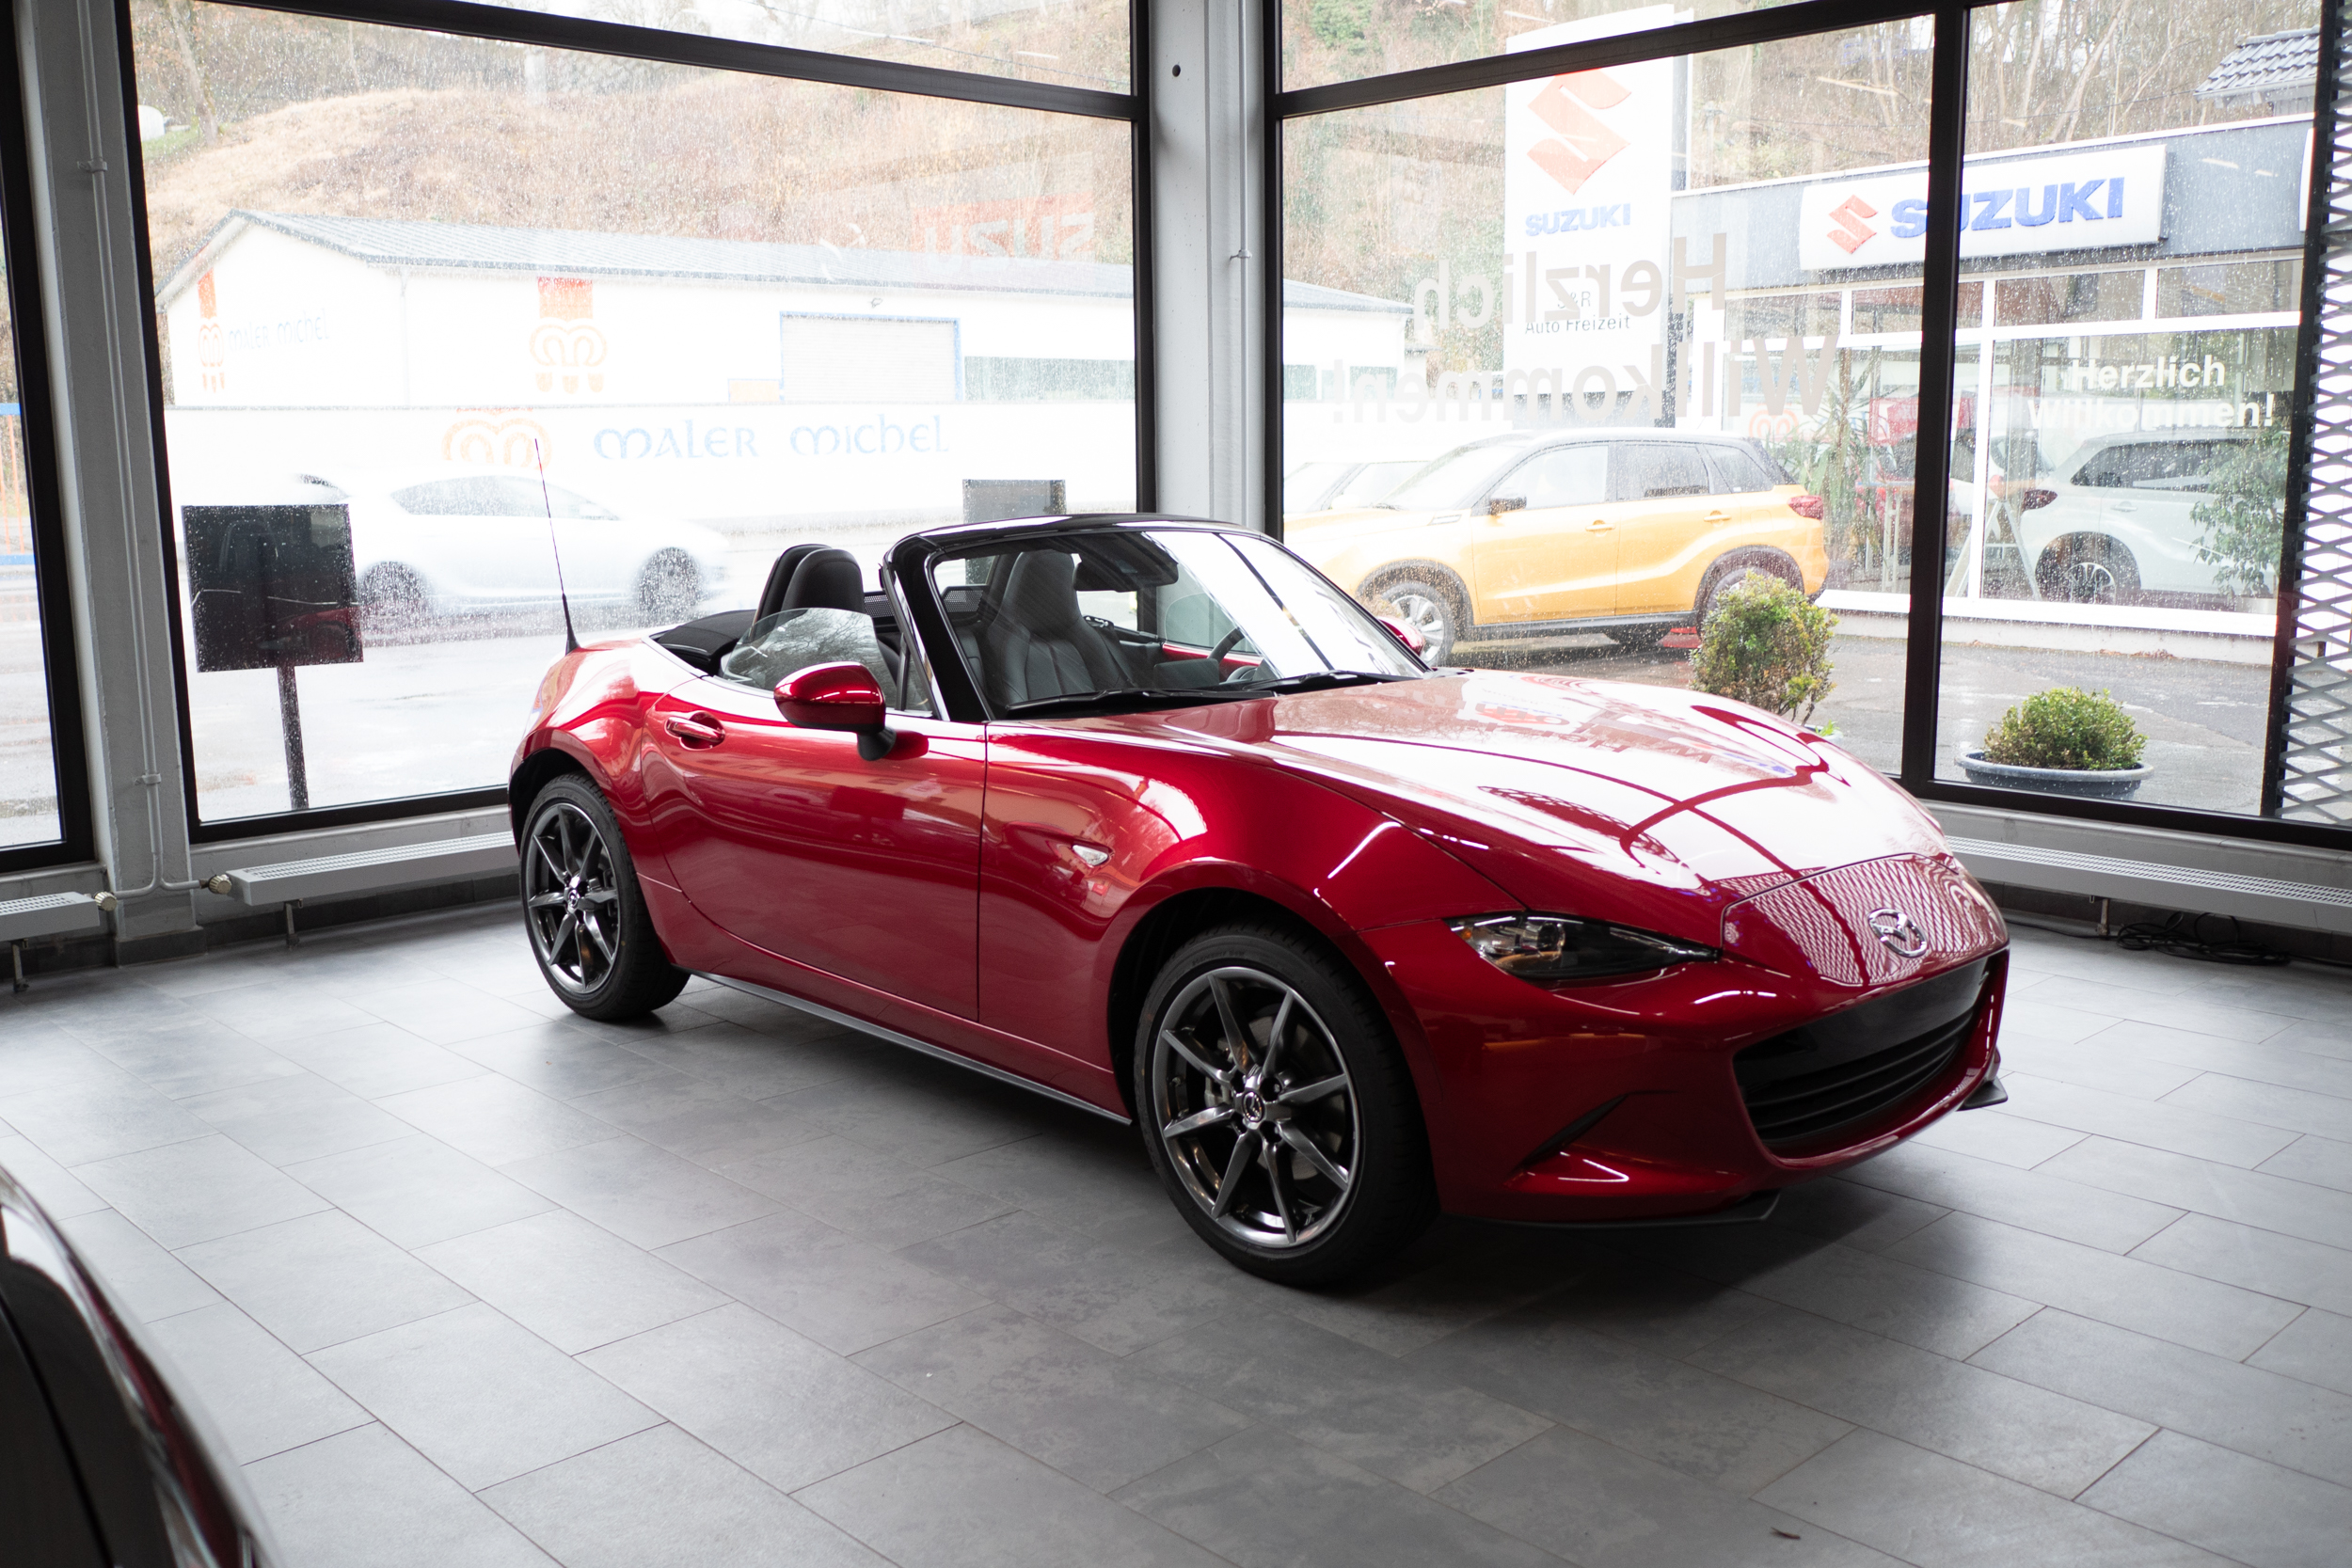 MX-5 ND for sale! - What should I want out for when buying?